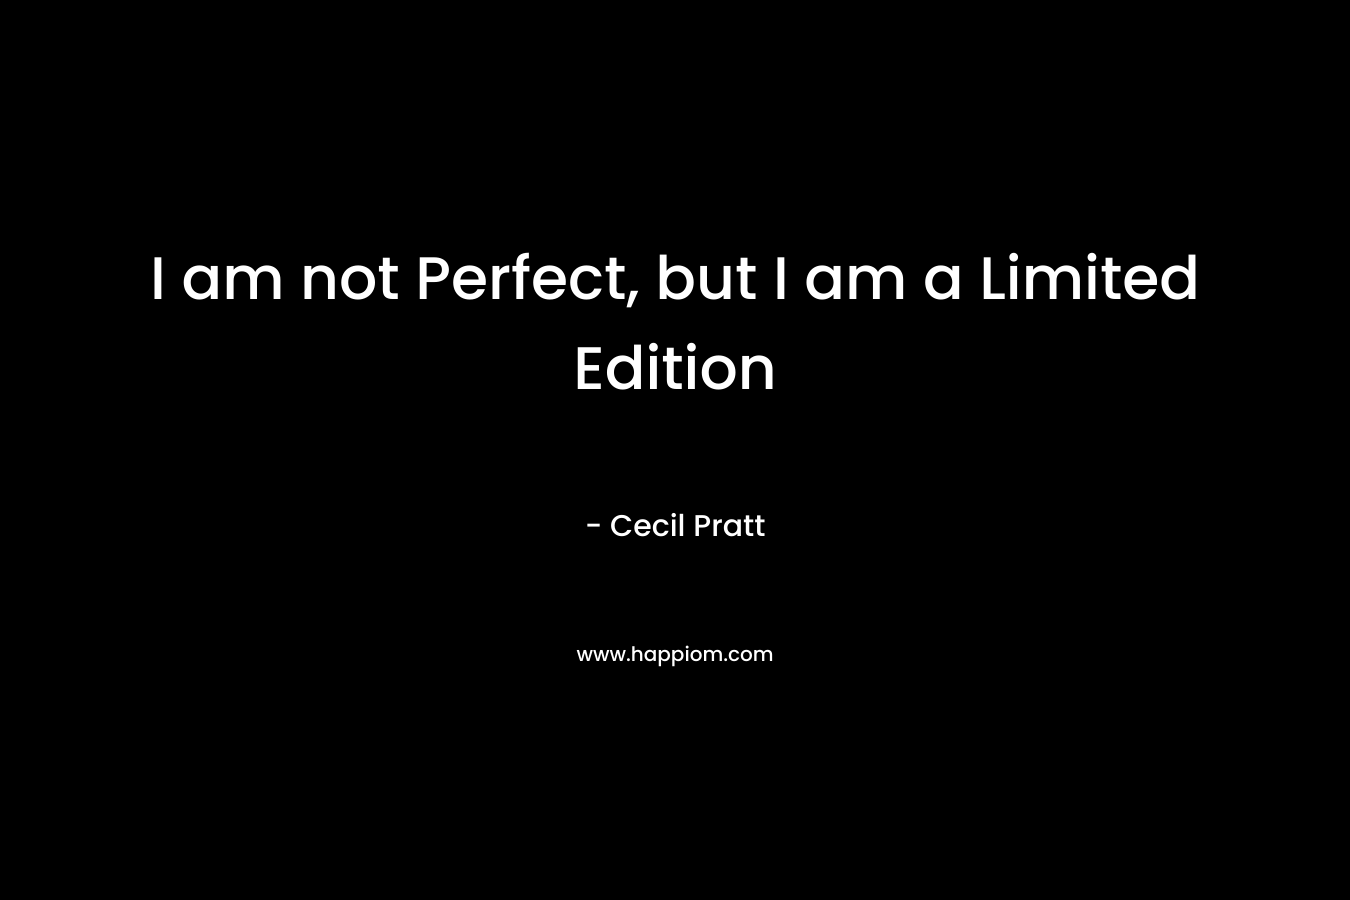 I am not Perfect, but I am a Limited Edition